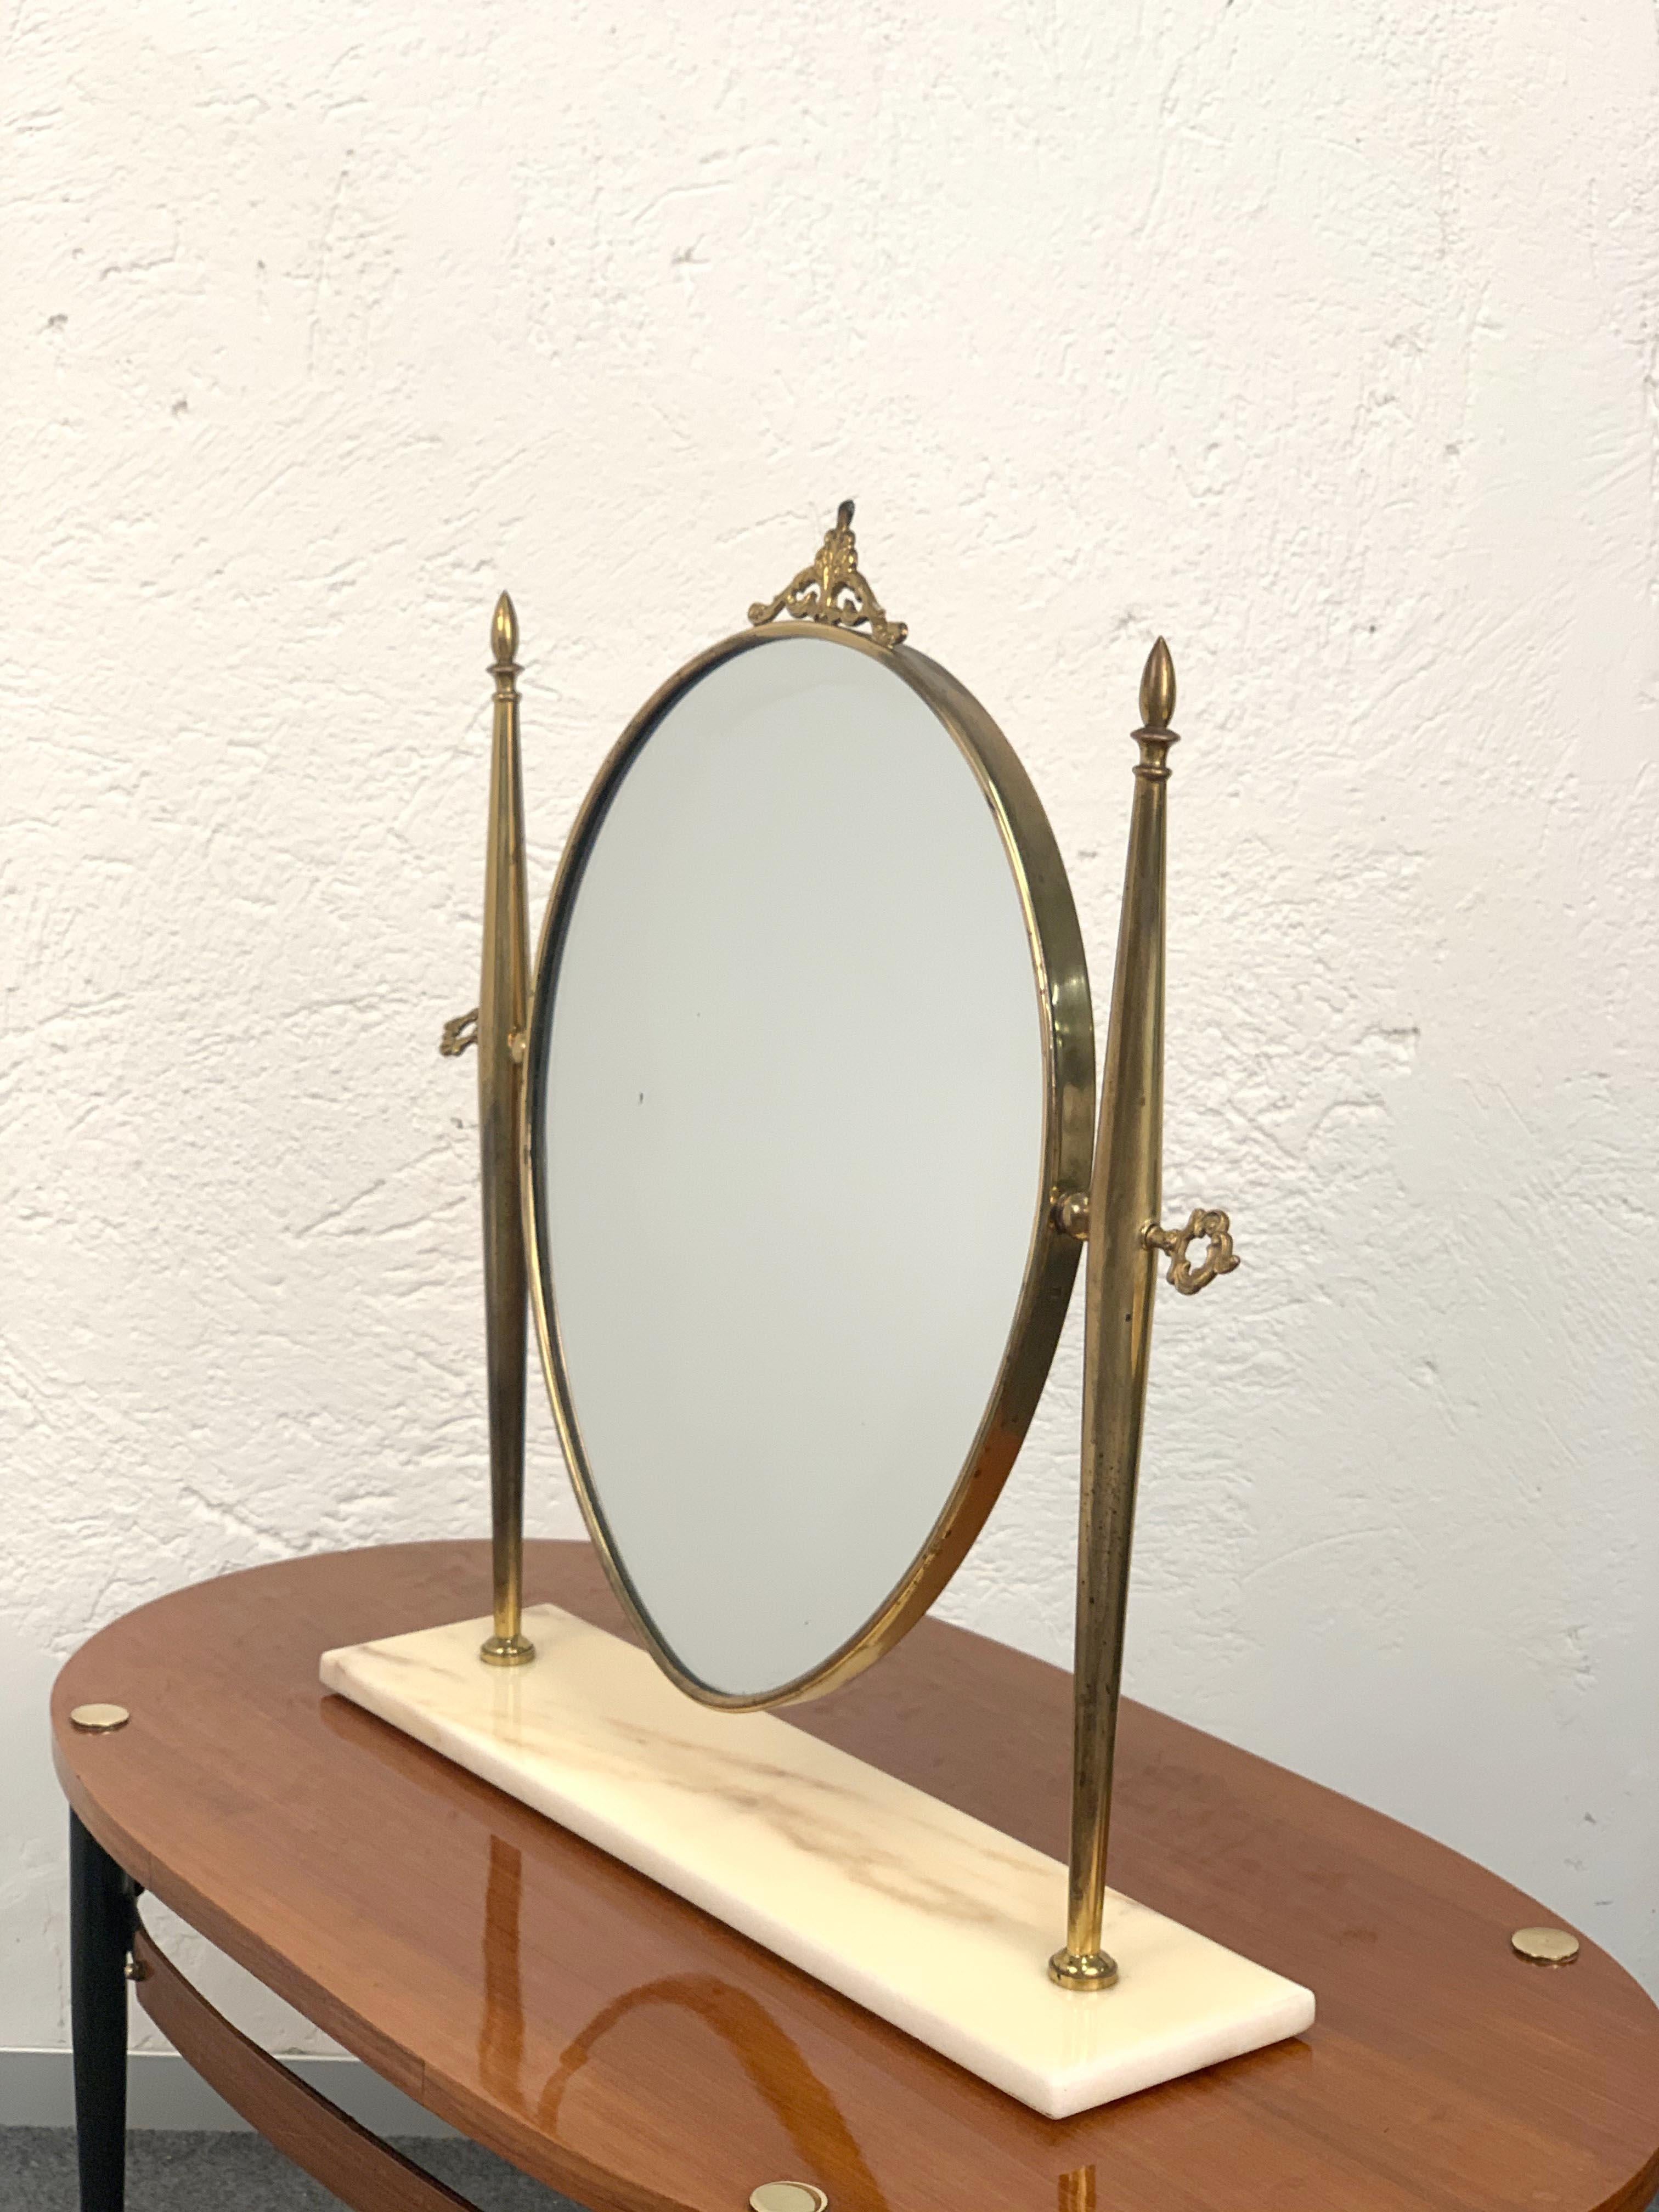 20th Century Italian Polished Brass Table Mirror with Marble Adjustable Vanity Base, 1950s For Sale